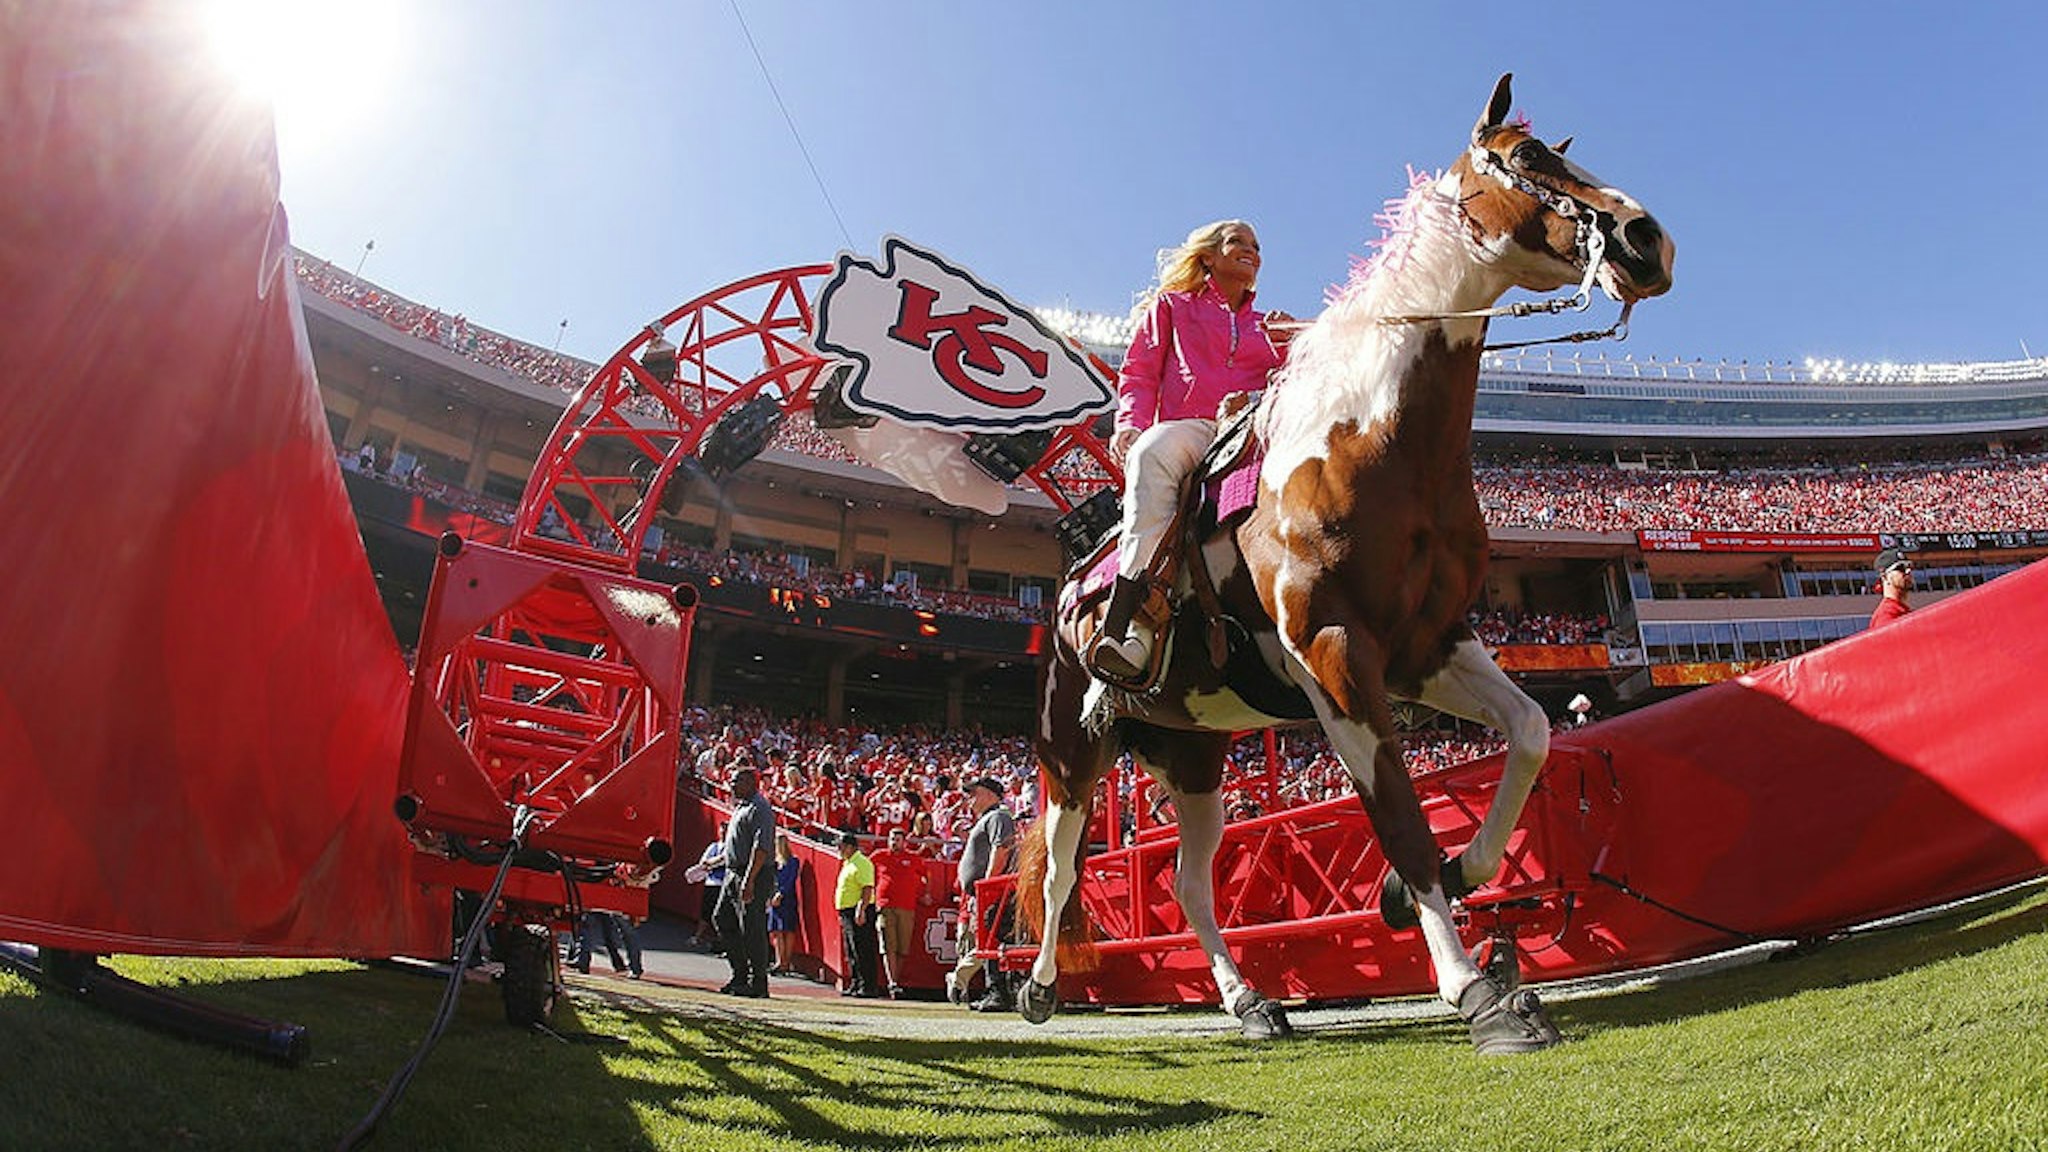 KANSAS CITY, MO - OCTOBER 13: Kansas City Chiefs cheerleader Susie rides Warpaint onto the field for the pre-game festivities before a game against the Oakland Raiders on October 13, 2013 at Arrowhead Stadium in Kansas City, Missouri.